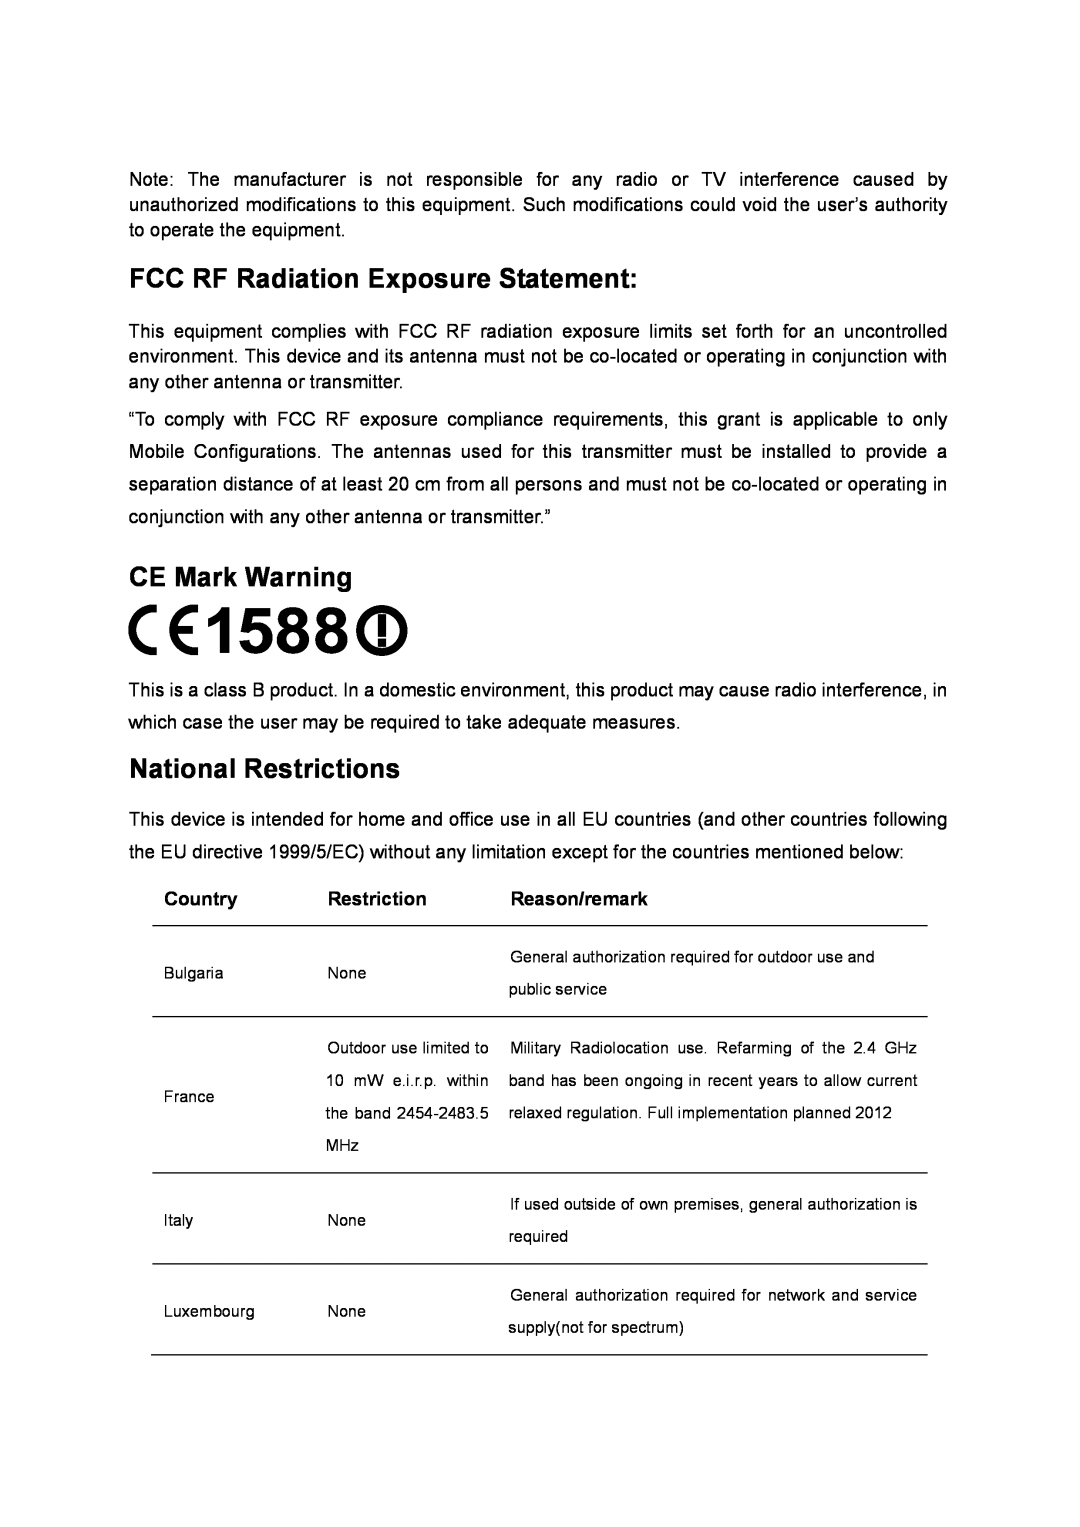 TP-Link AC1200 manual FCC RF Radiation Exposure Statement, CE Mark Warning, National Restrictions 